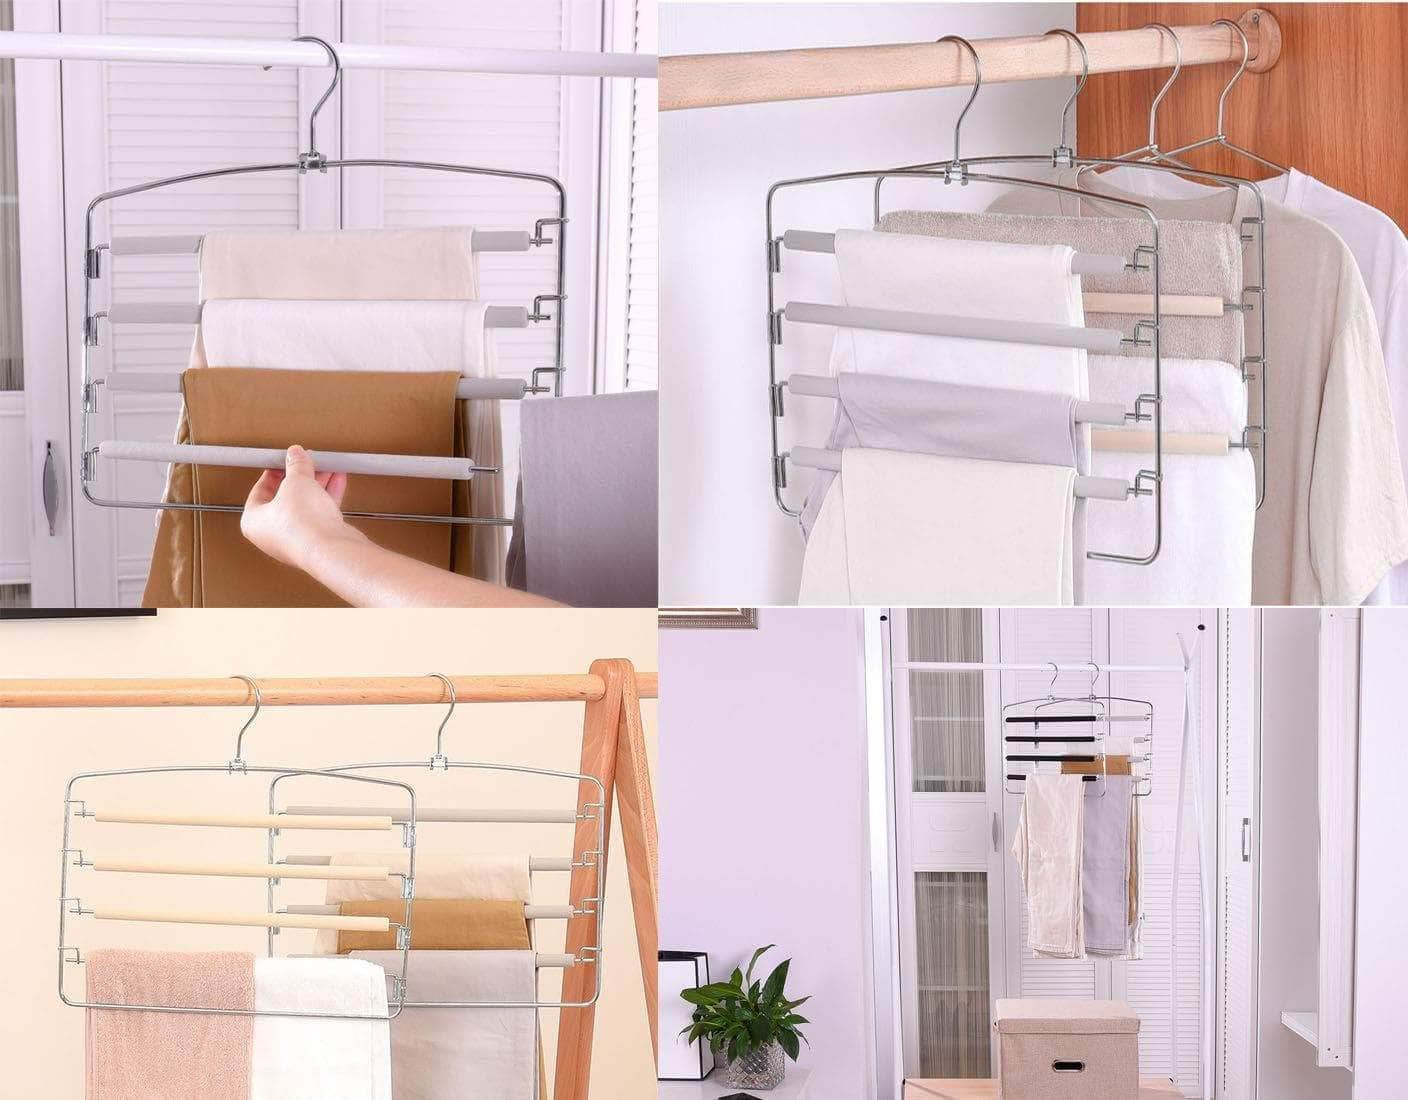 Buy now knocbel pants clothes hanger closet organizer 4 layers non slip swing arm hangers hook rack for slacks jeans trousers skirts scarf 2 pack beige